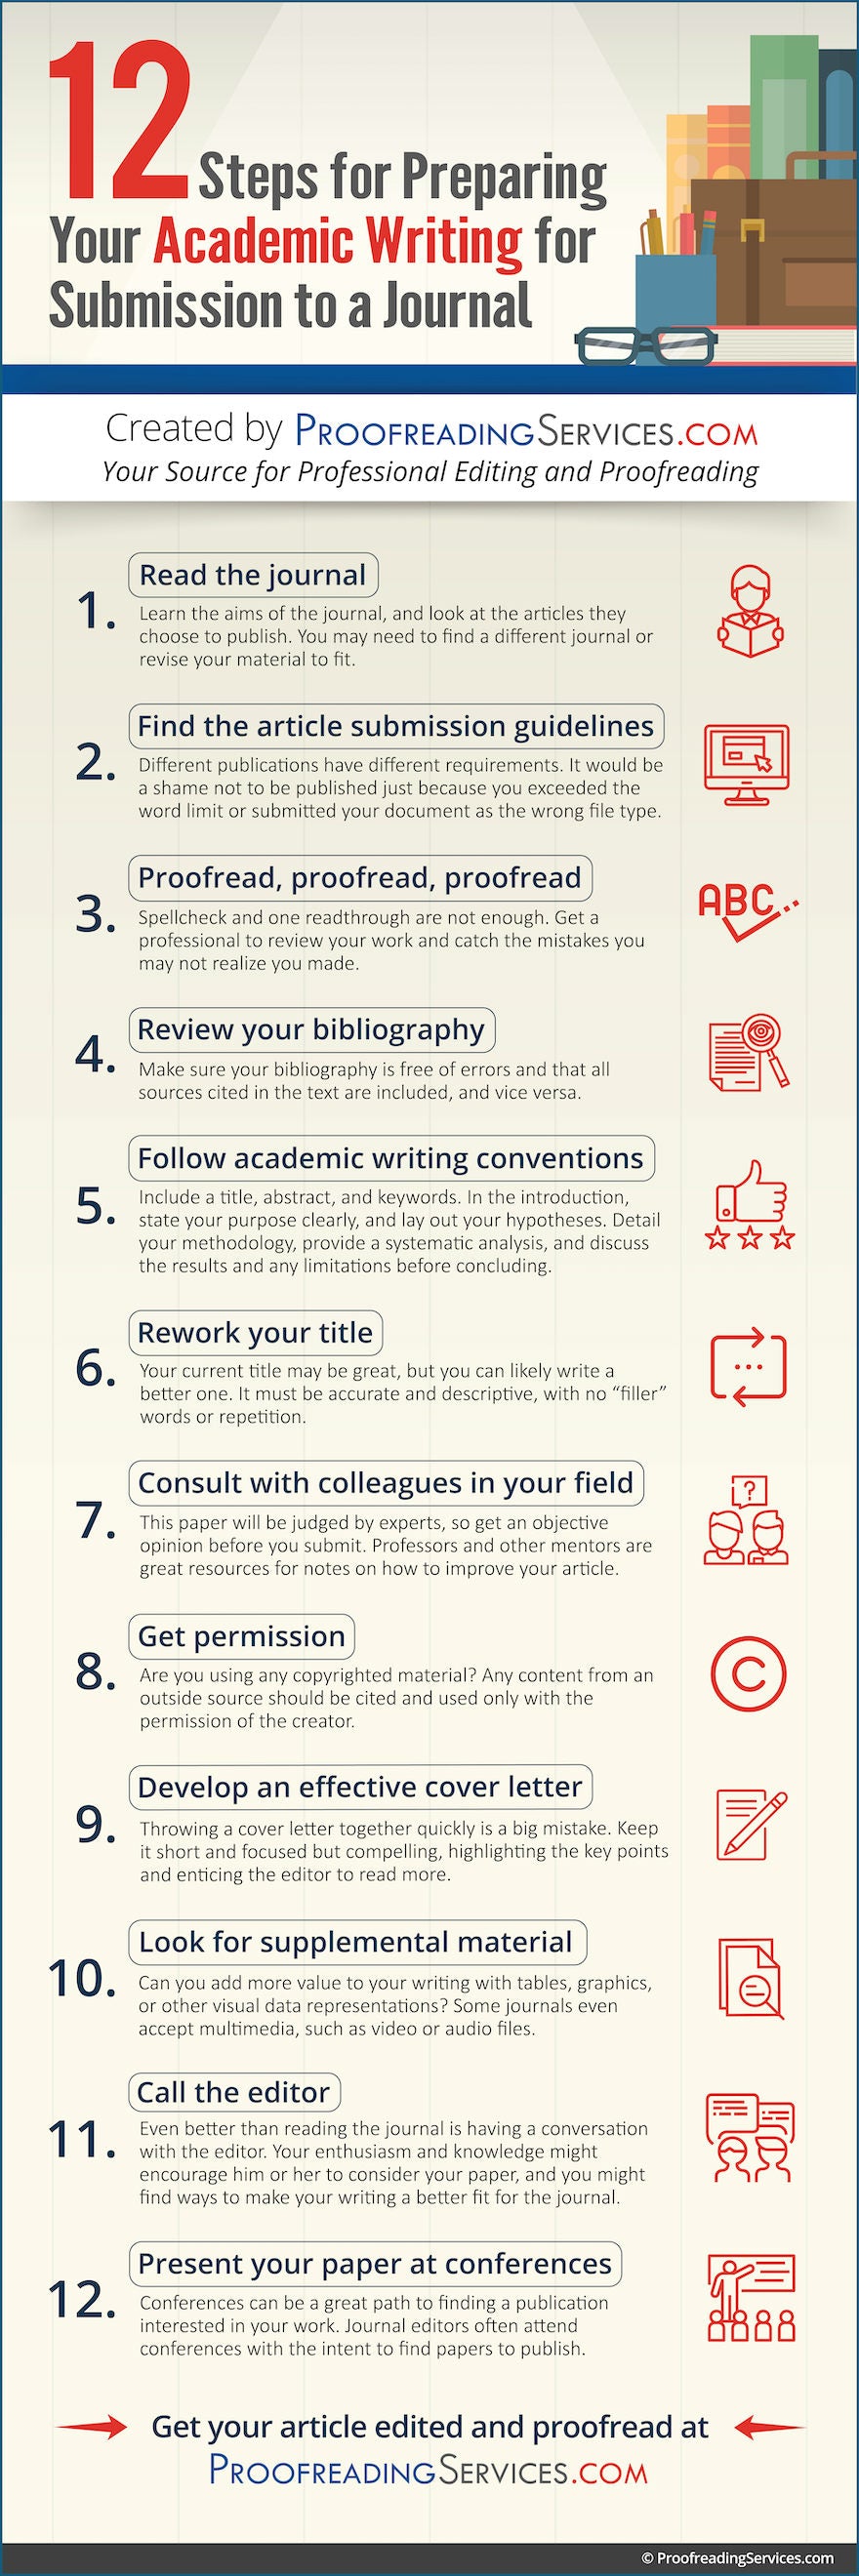 12 Steps for Preparing Your Academic Writing for Submission to a Journal infographic